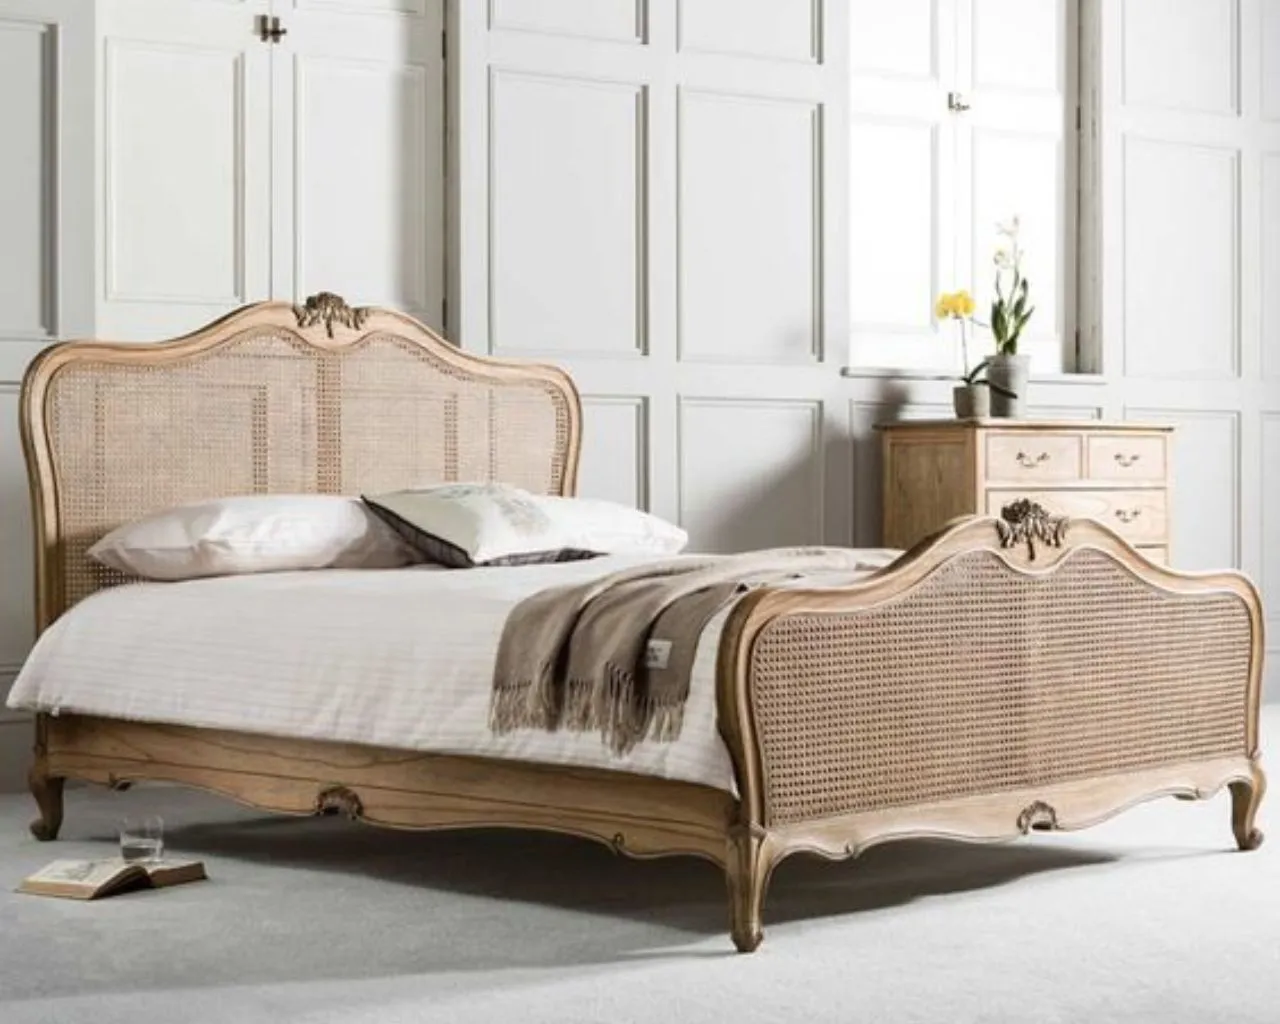 French Cane Bed